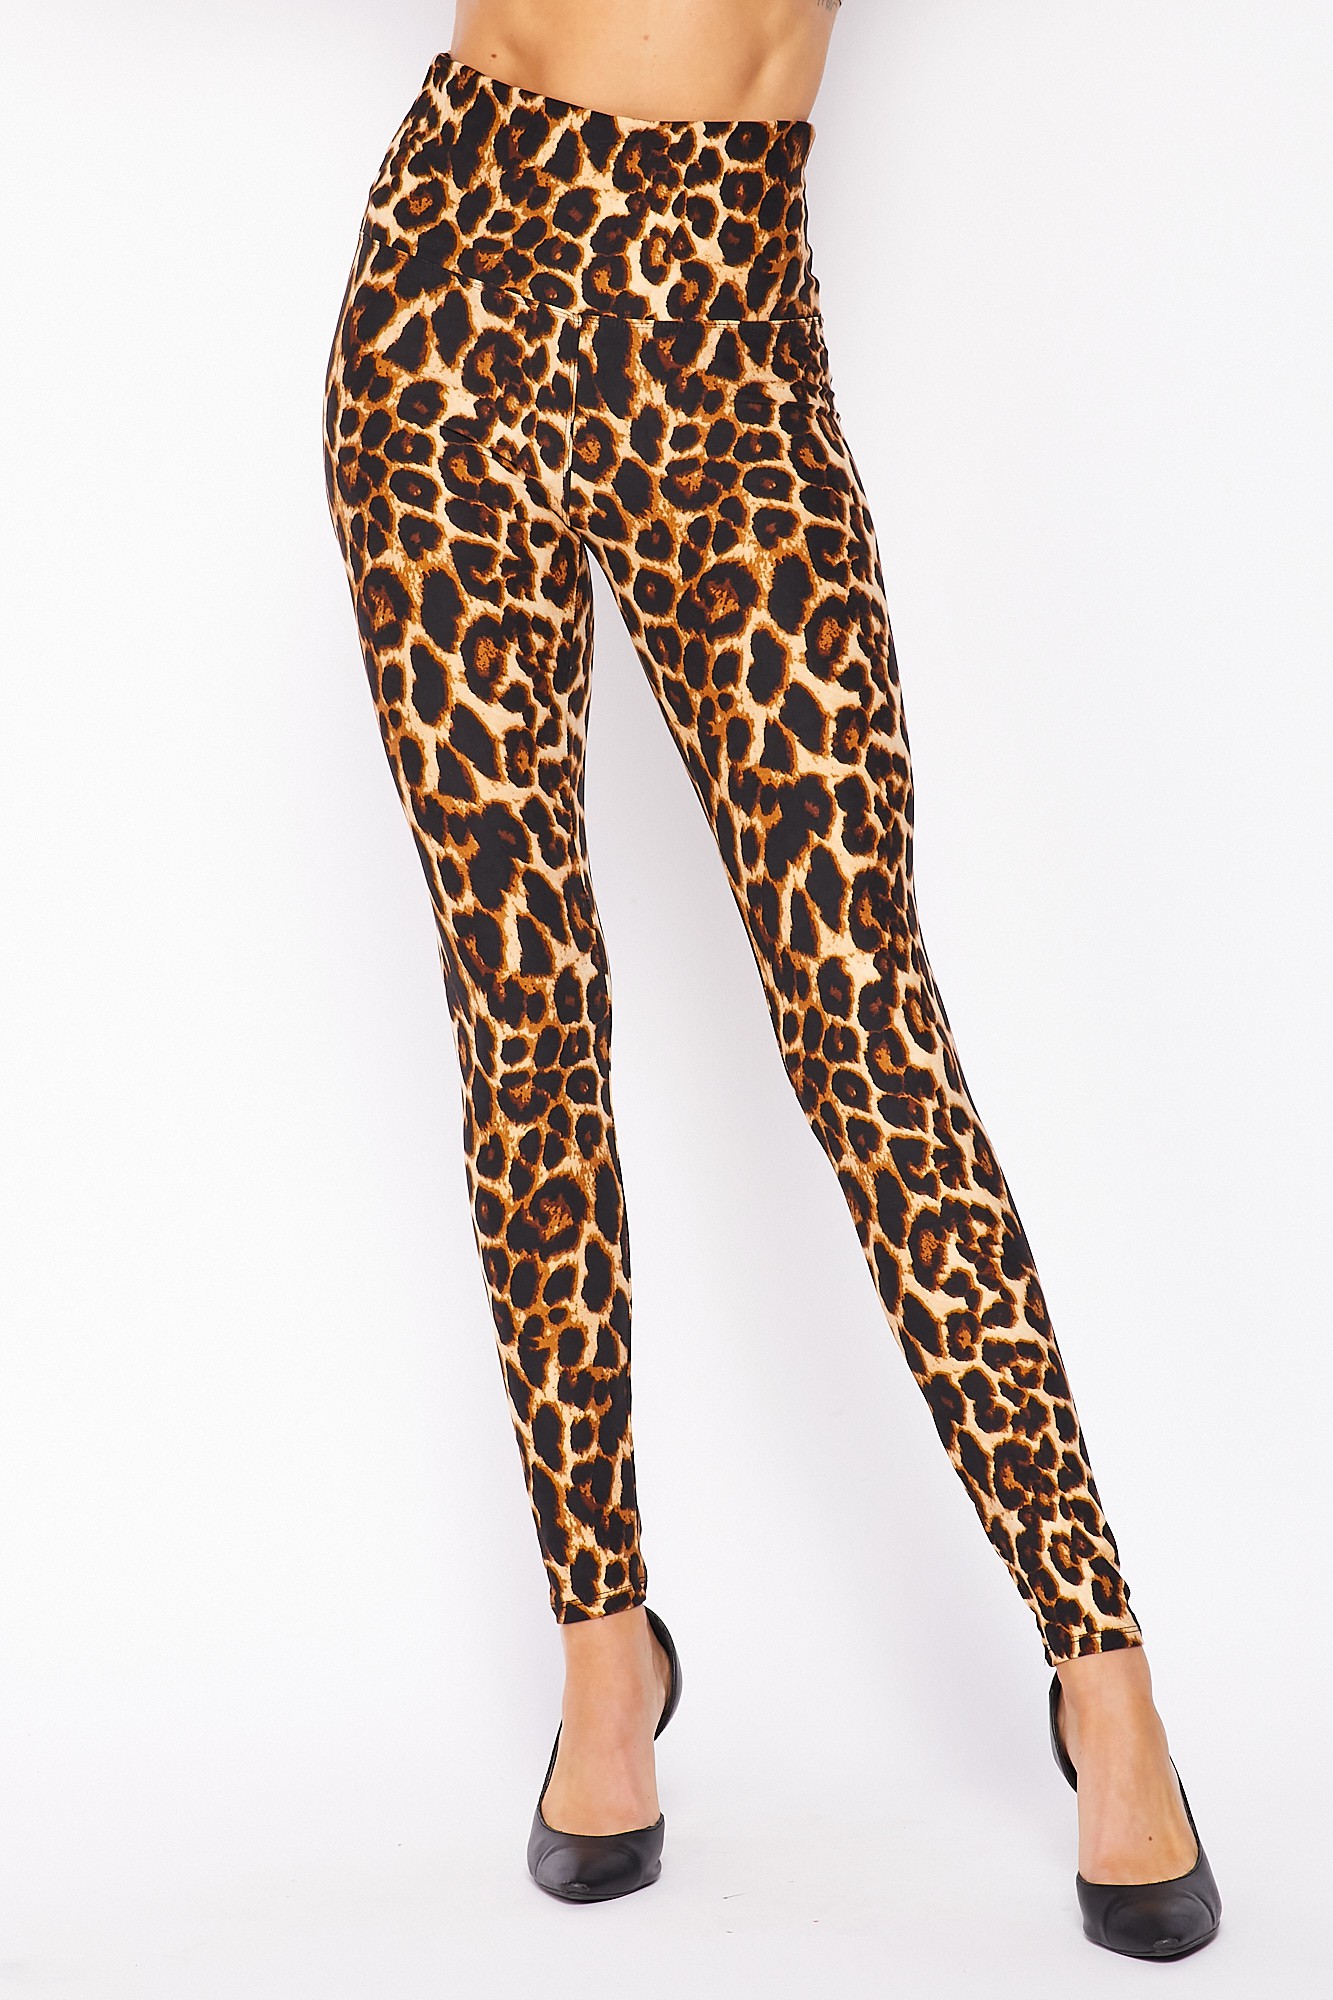 Wholesale Buttery Smooth Bold and Beautiful High Waist Leopard Plus Size Leggings - 5 Inch Waist